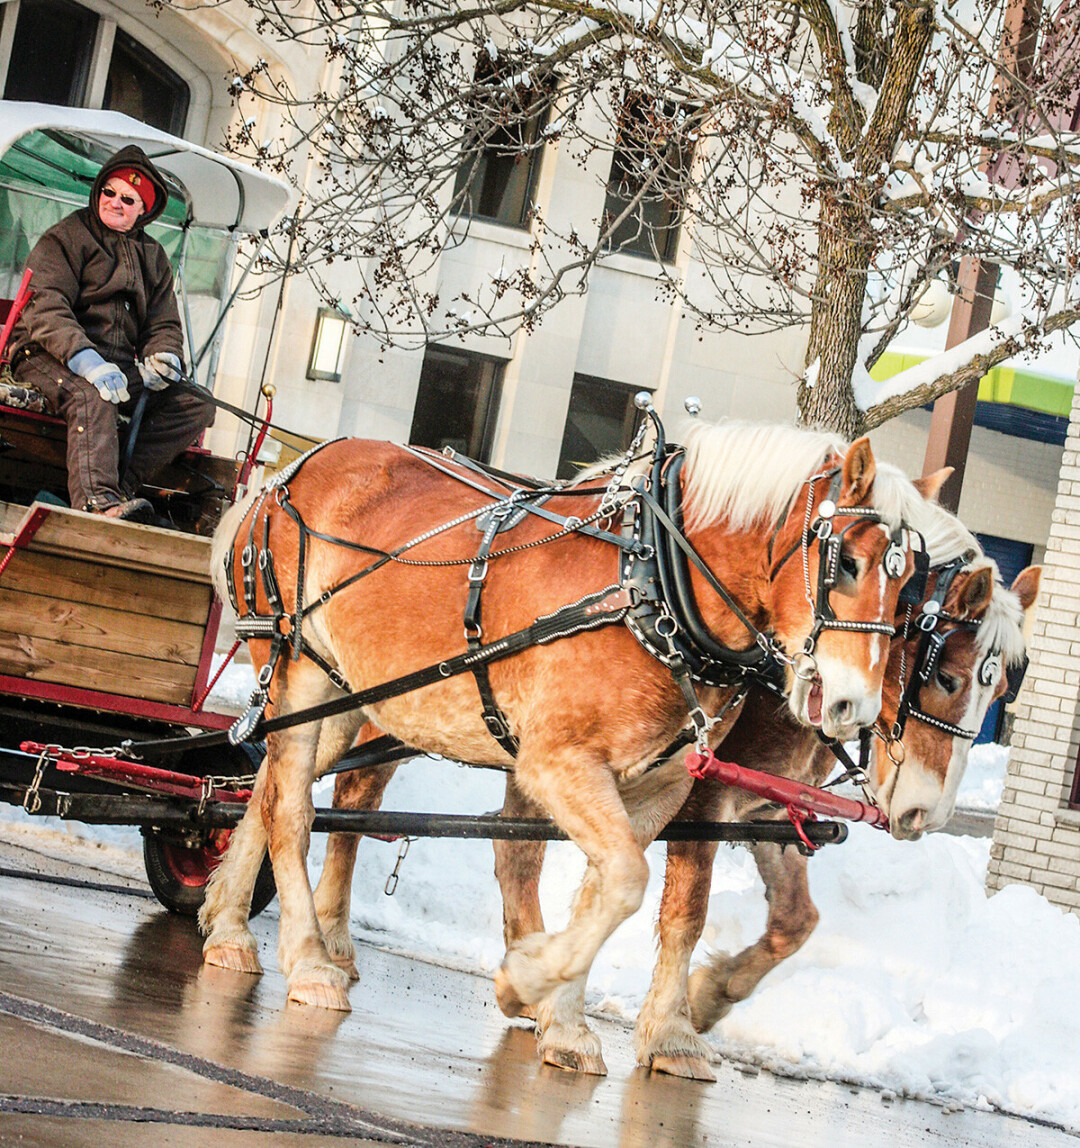 IT'S GOT TWO HORSES, AND THE SLEIGH ISN'T OPEN, BUT YOU GET THE IDEA.. Laugh yourself hoarse with a wintry wagon ride this season.